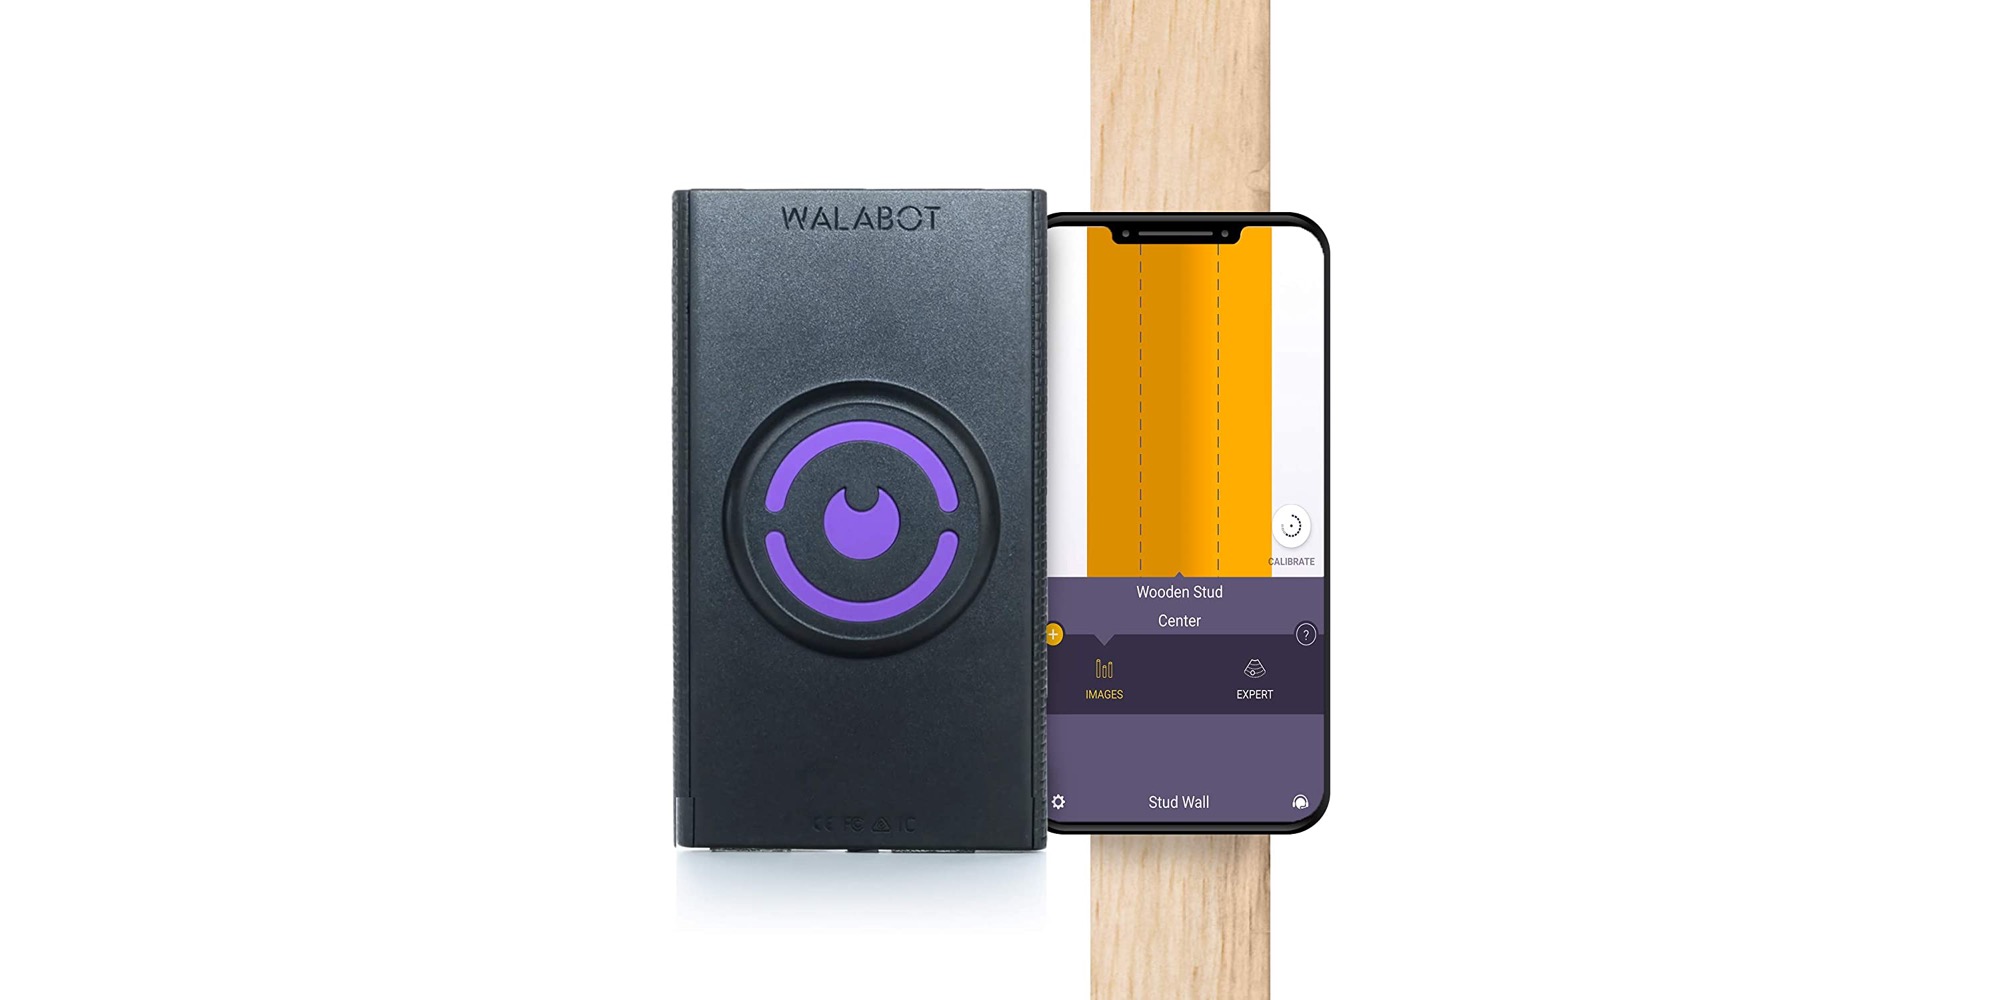 Feel like Superman with Walabot's In-Wall Imager at $49 (Save 28%)